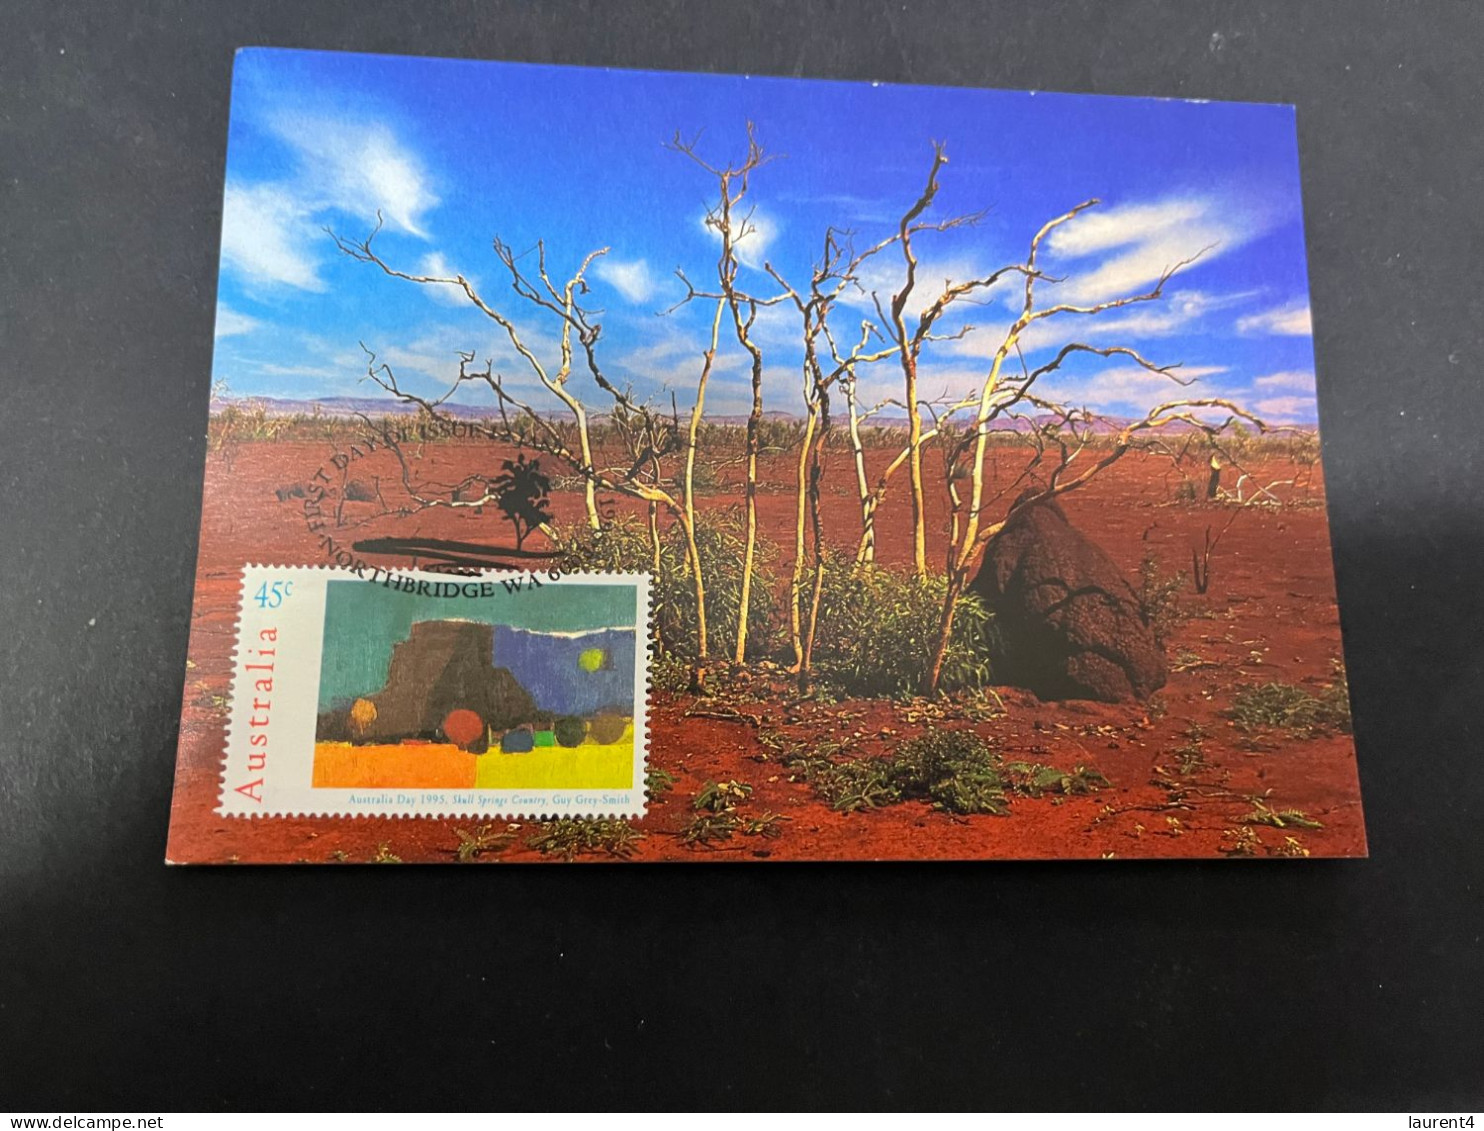 18-4-2024 (2 Z 25 A) Australia Maxicard (4 Country-side Views) If No Bid - This Items Will NOT Be Re-listed For Sale - Maximum Cards